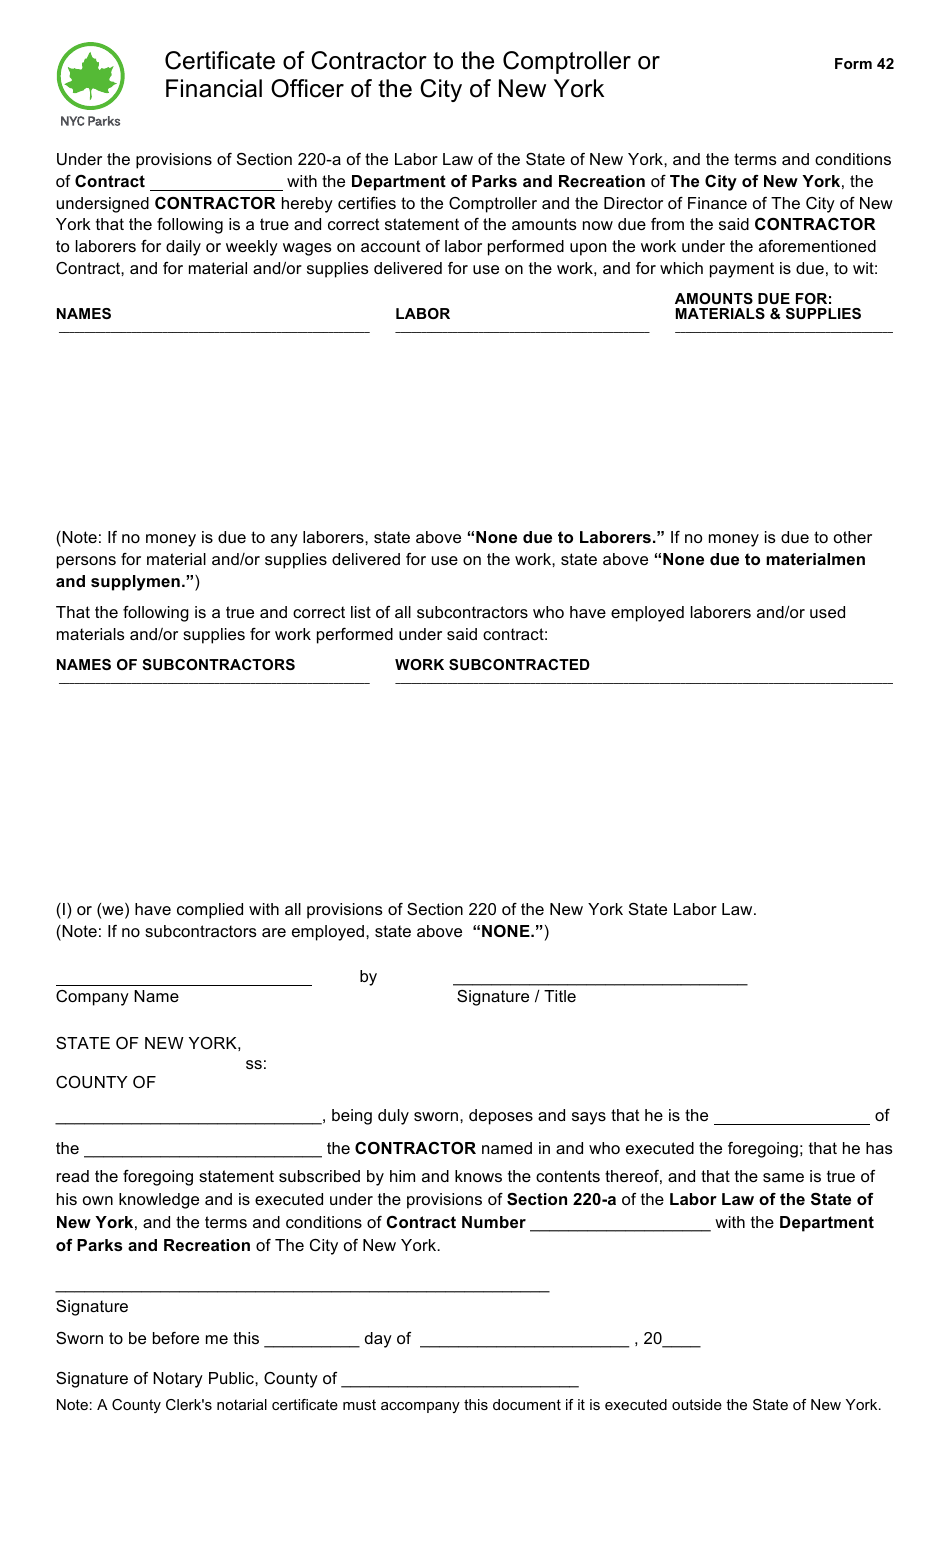 Form 42 Certificate of Contractor to the Comptroller or Financial Officer of the City of New York - New York City, Page 1